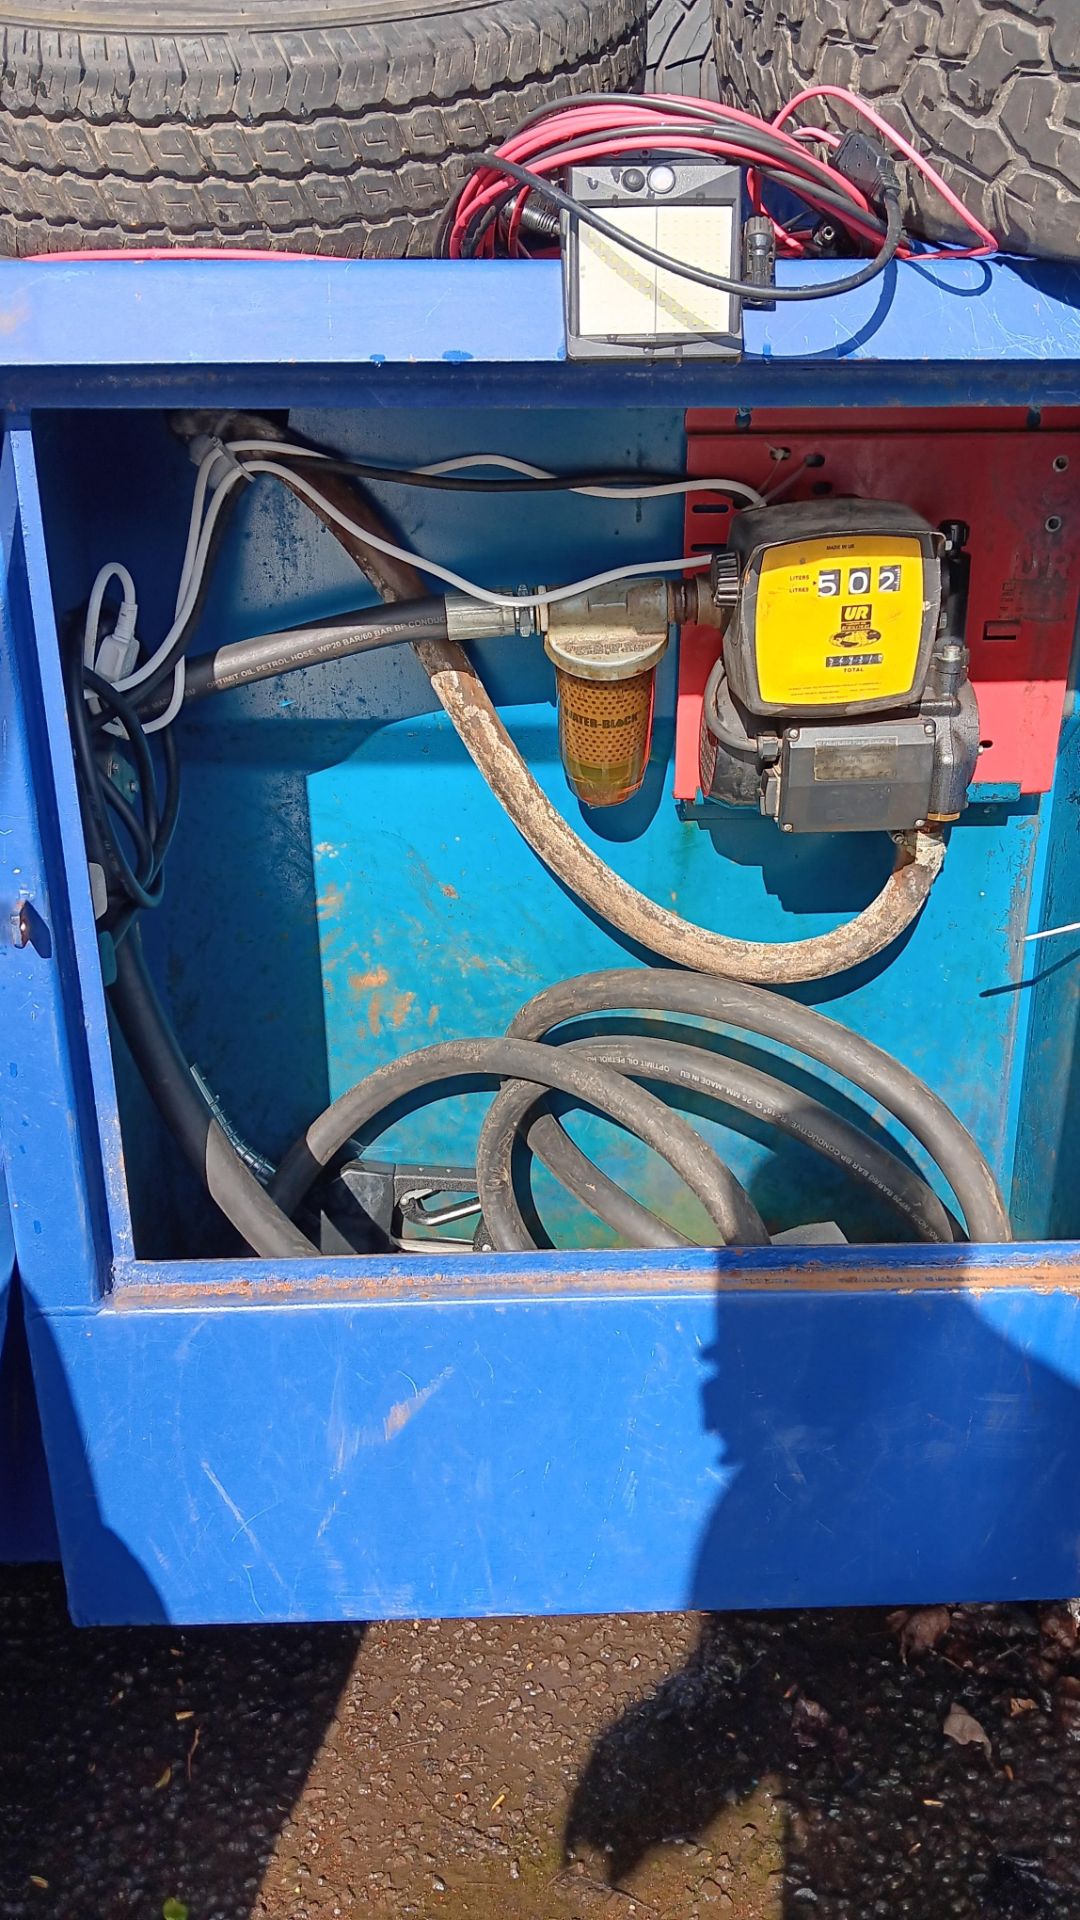 Fuel Flask UN1202 10,000 litre Steel bunded fuel dispensing tank – advised tank contains approx - Image 3 of 8